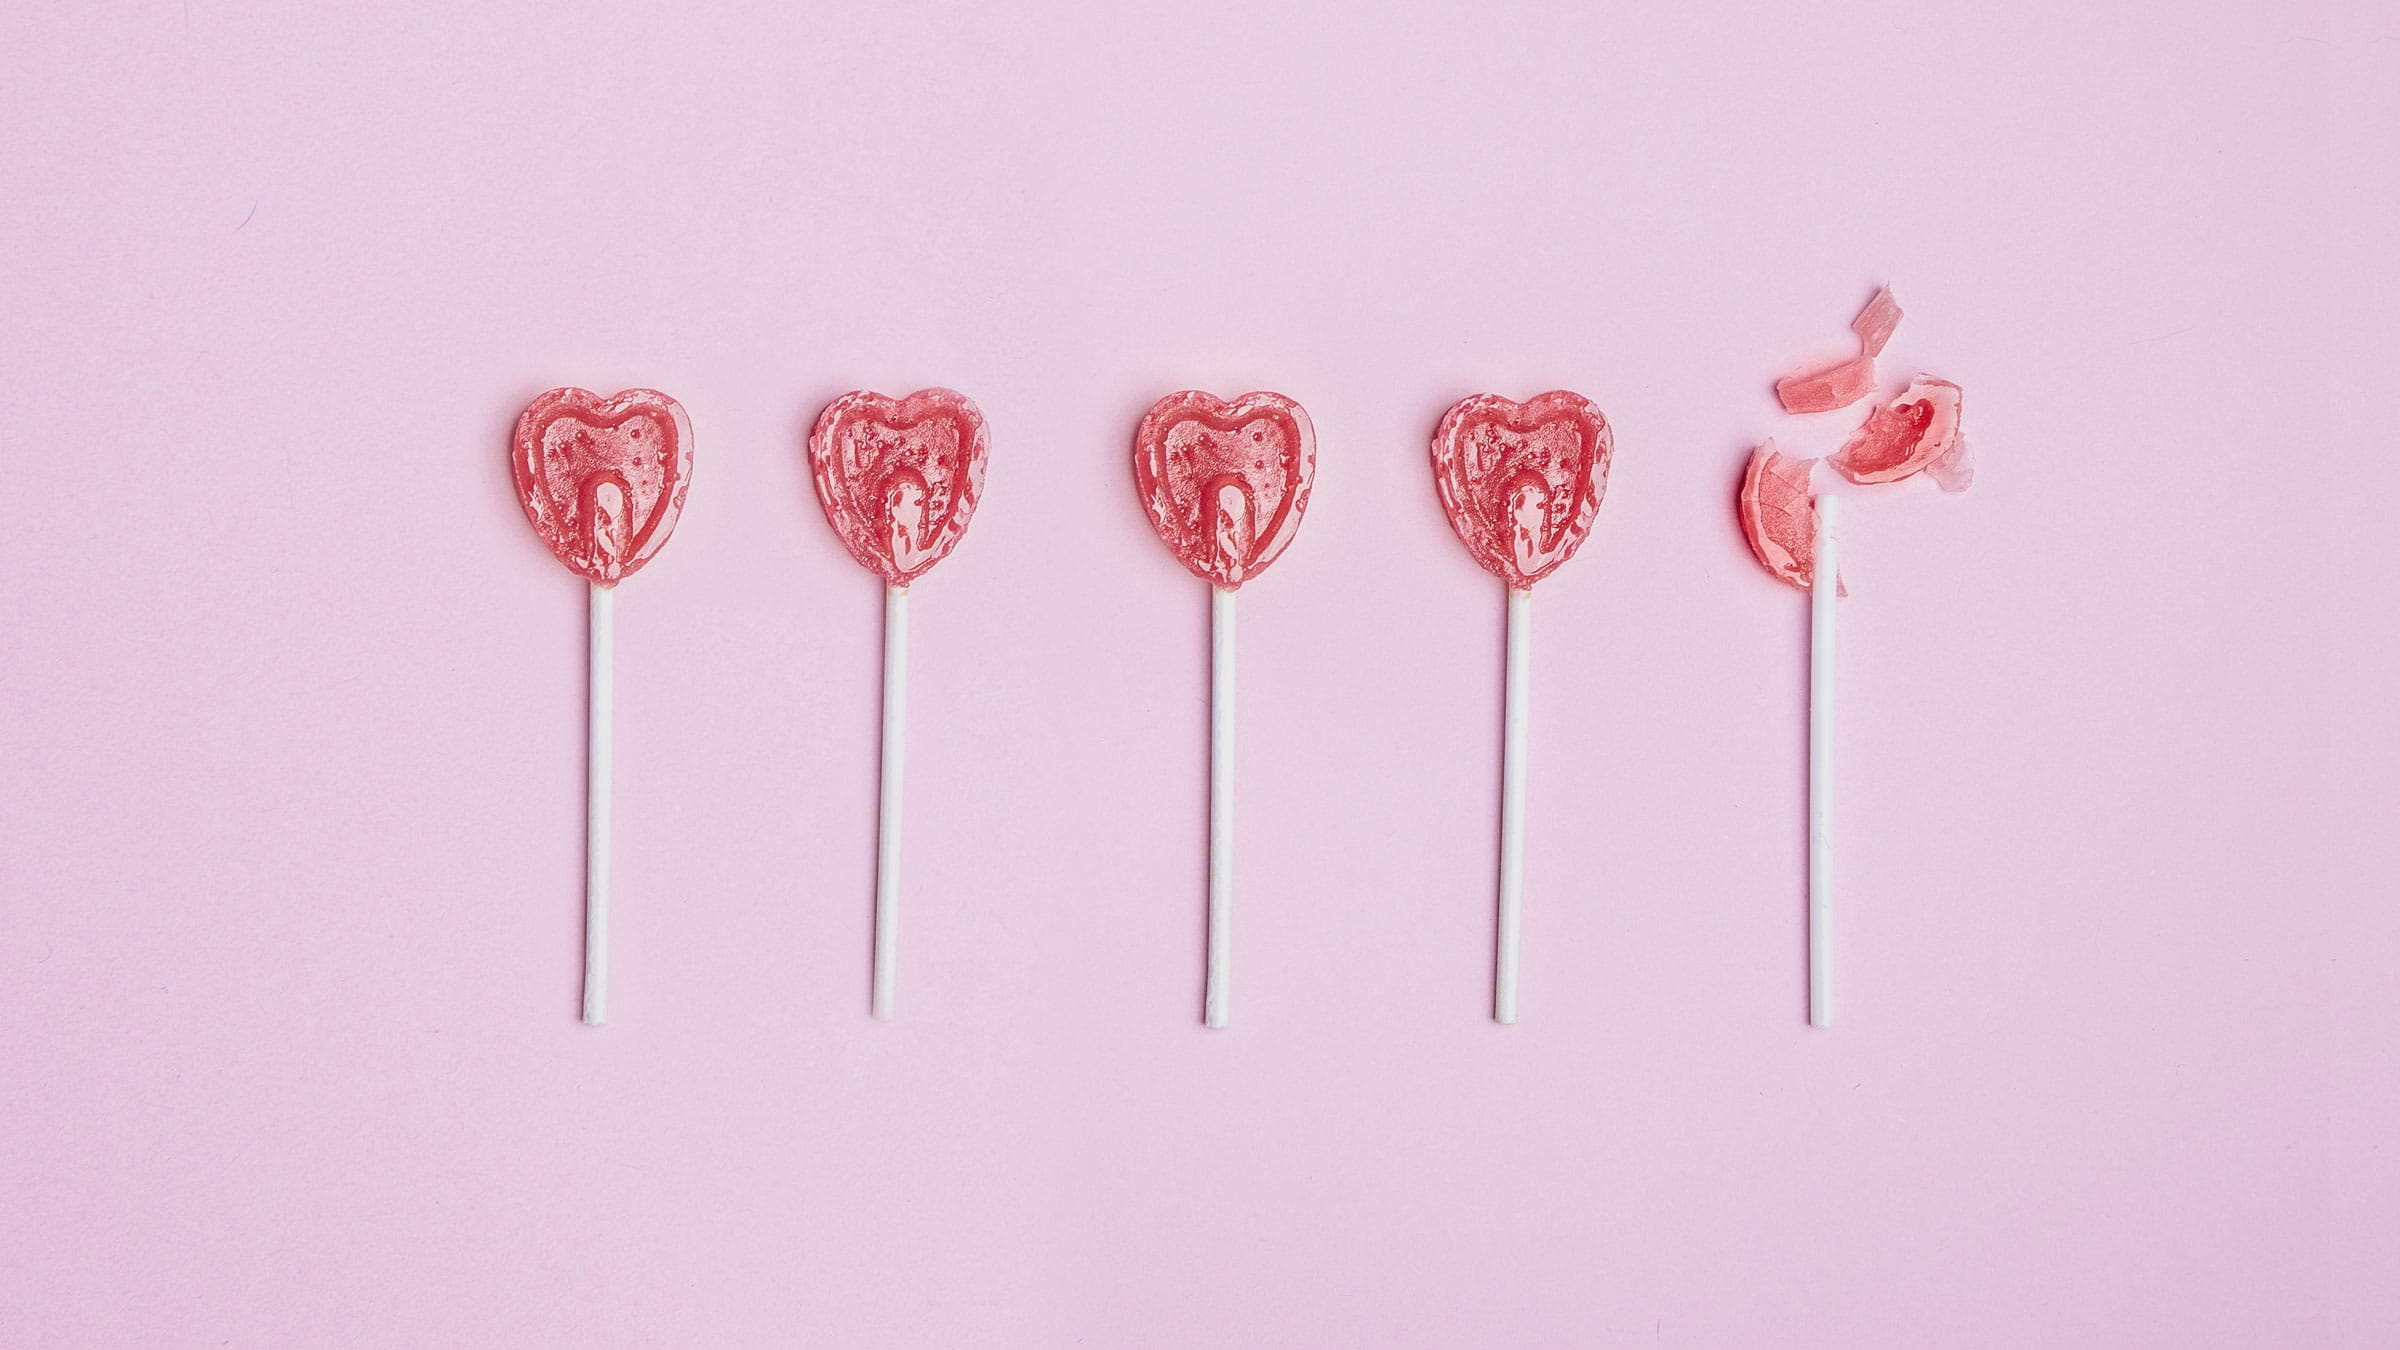 Five red, heart-shaped lollipops on a pink background. The last lollipop is cracked.